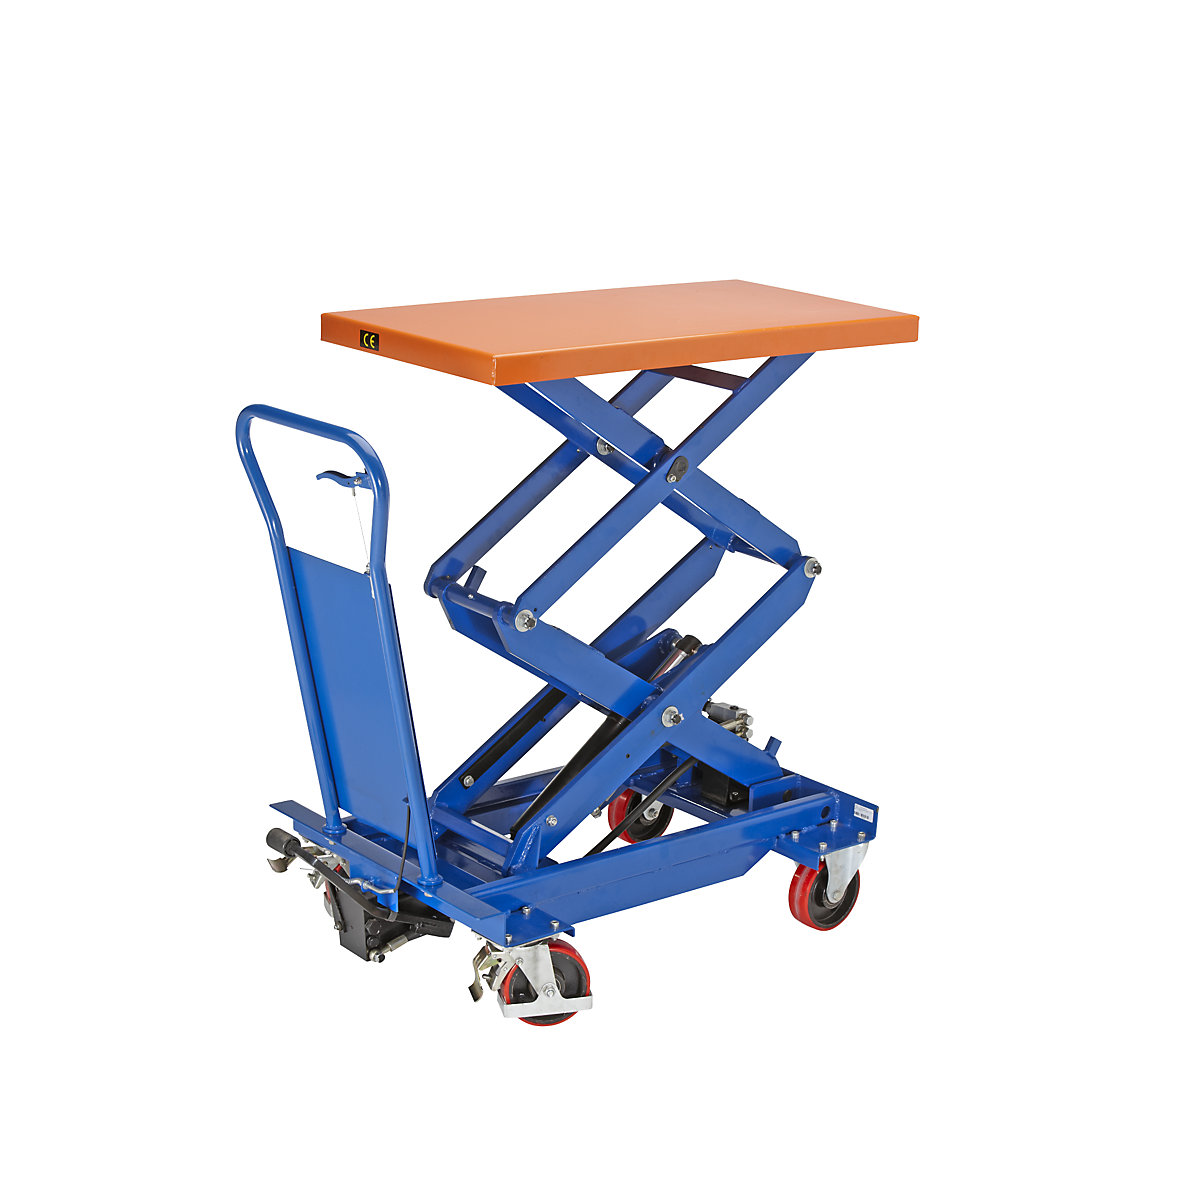 Lifting platform trolley with double scissors, max. load 650 kg, lifting range 470 – 1410 mm